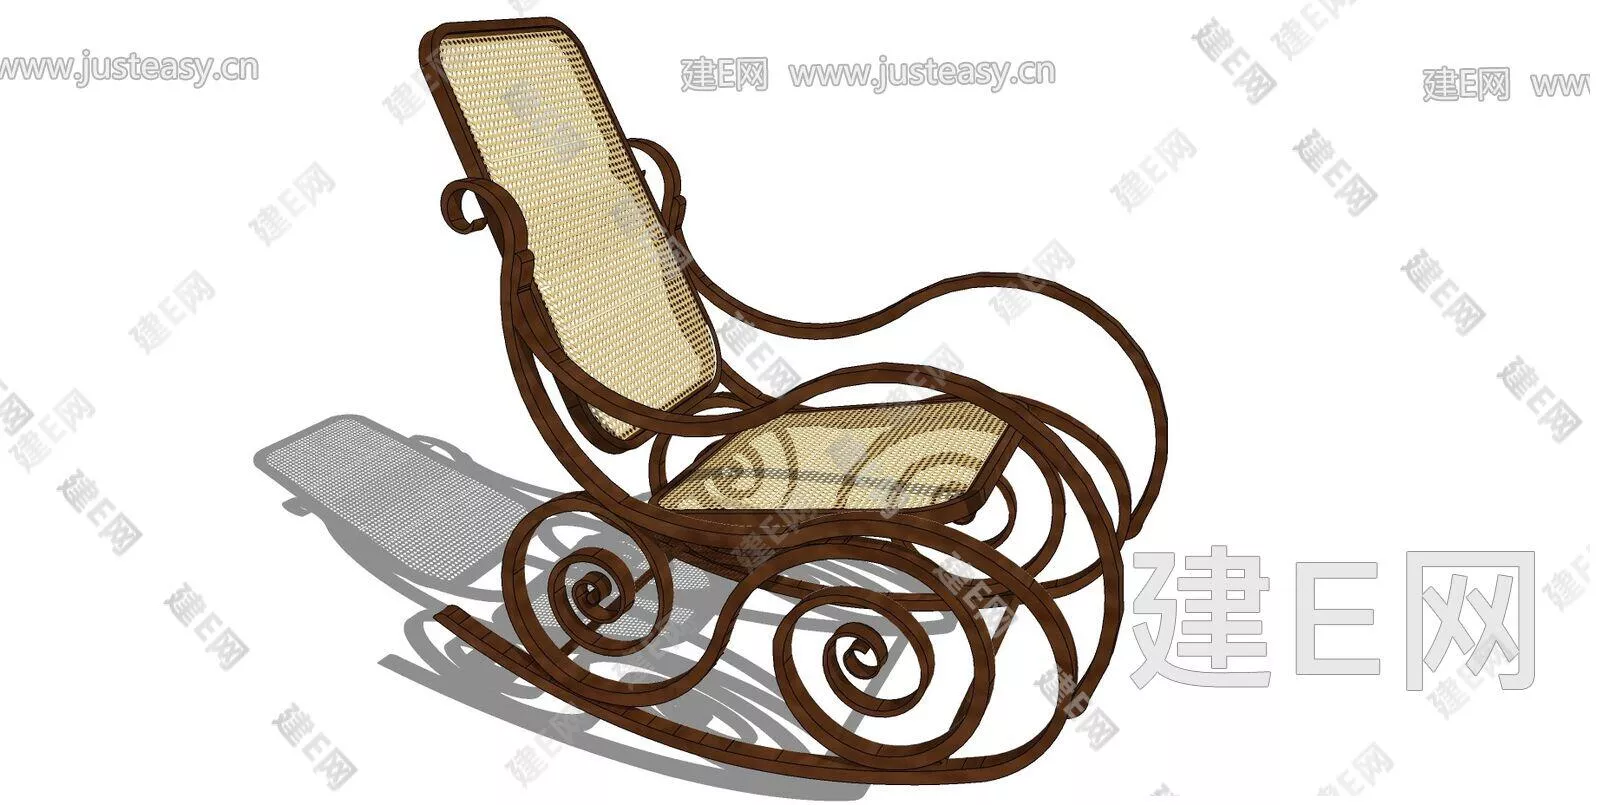 CHINESE OFFICE CHAIR - SKETCHUP 3D MODEL - ENSCAPE - 105791587